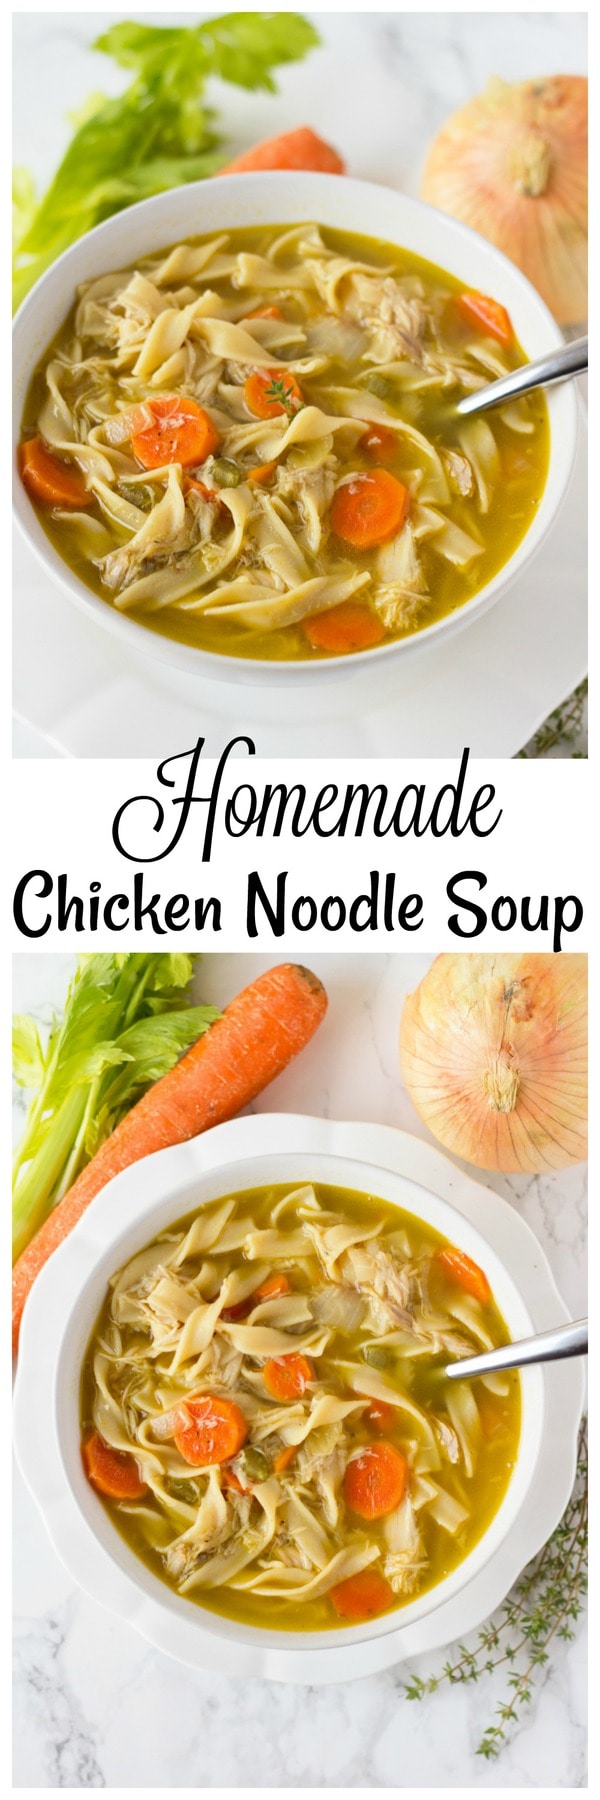 GOOD HOMEMADE CHICKEN NOODLE SOUP RECIPE